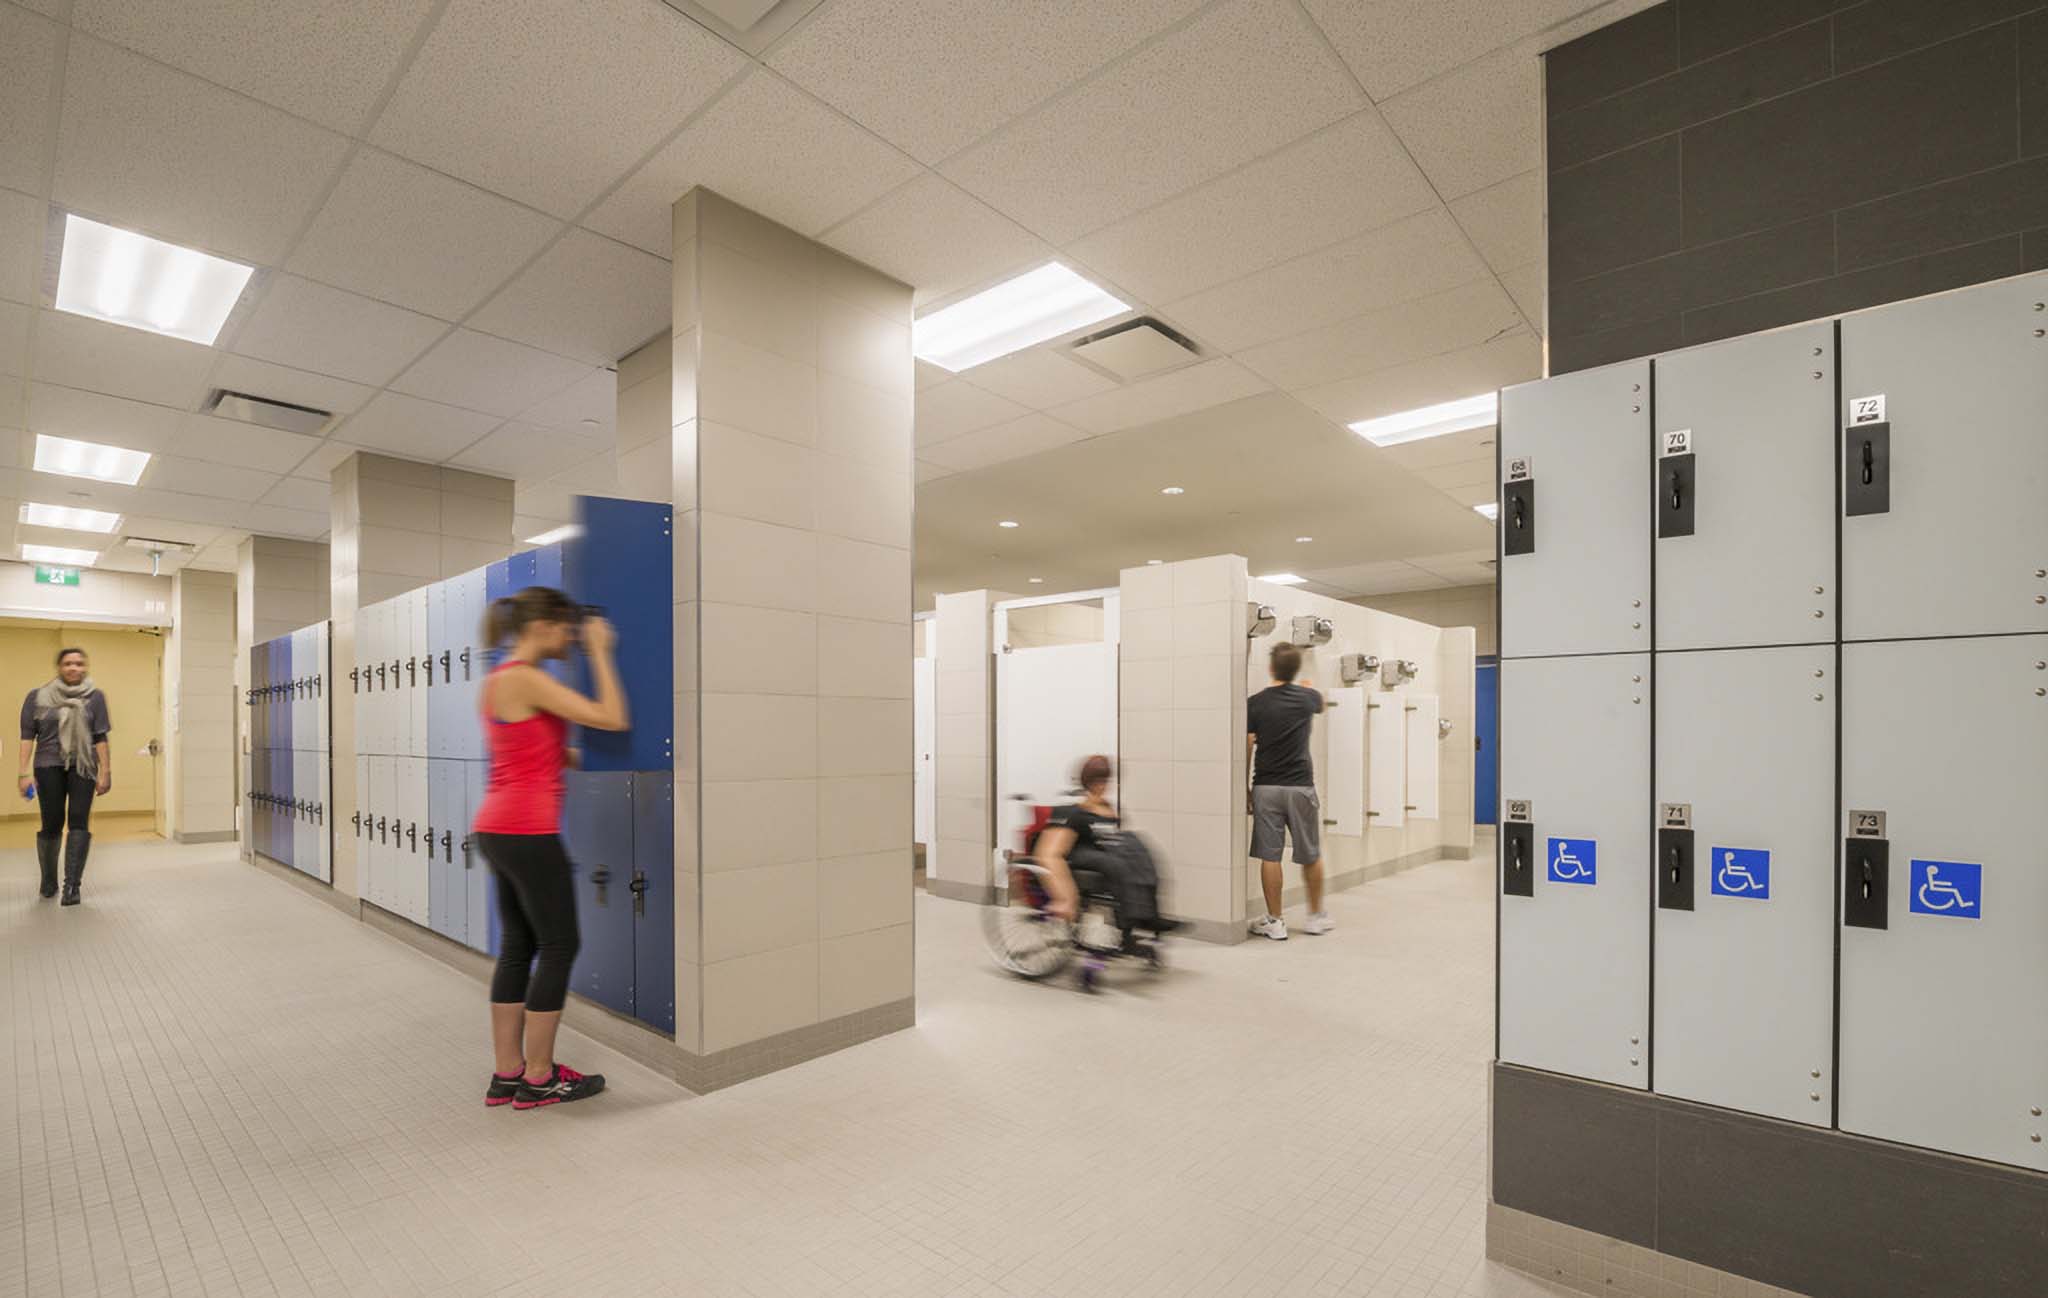 It is important to design changing facilities with accessibility in mind, so that all visitors can use a changing room hygienically and with dignity.